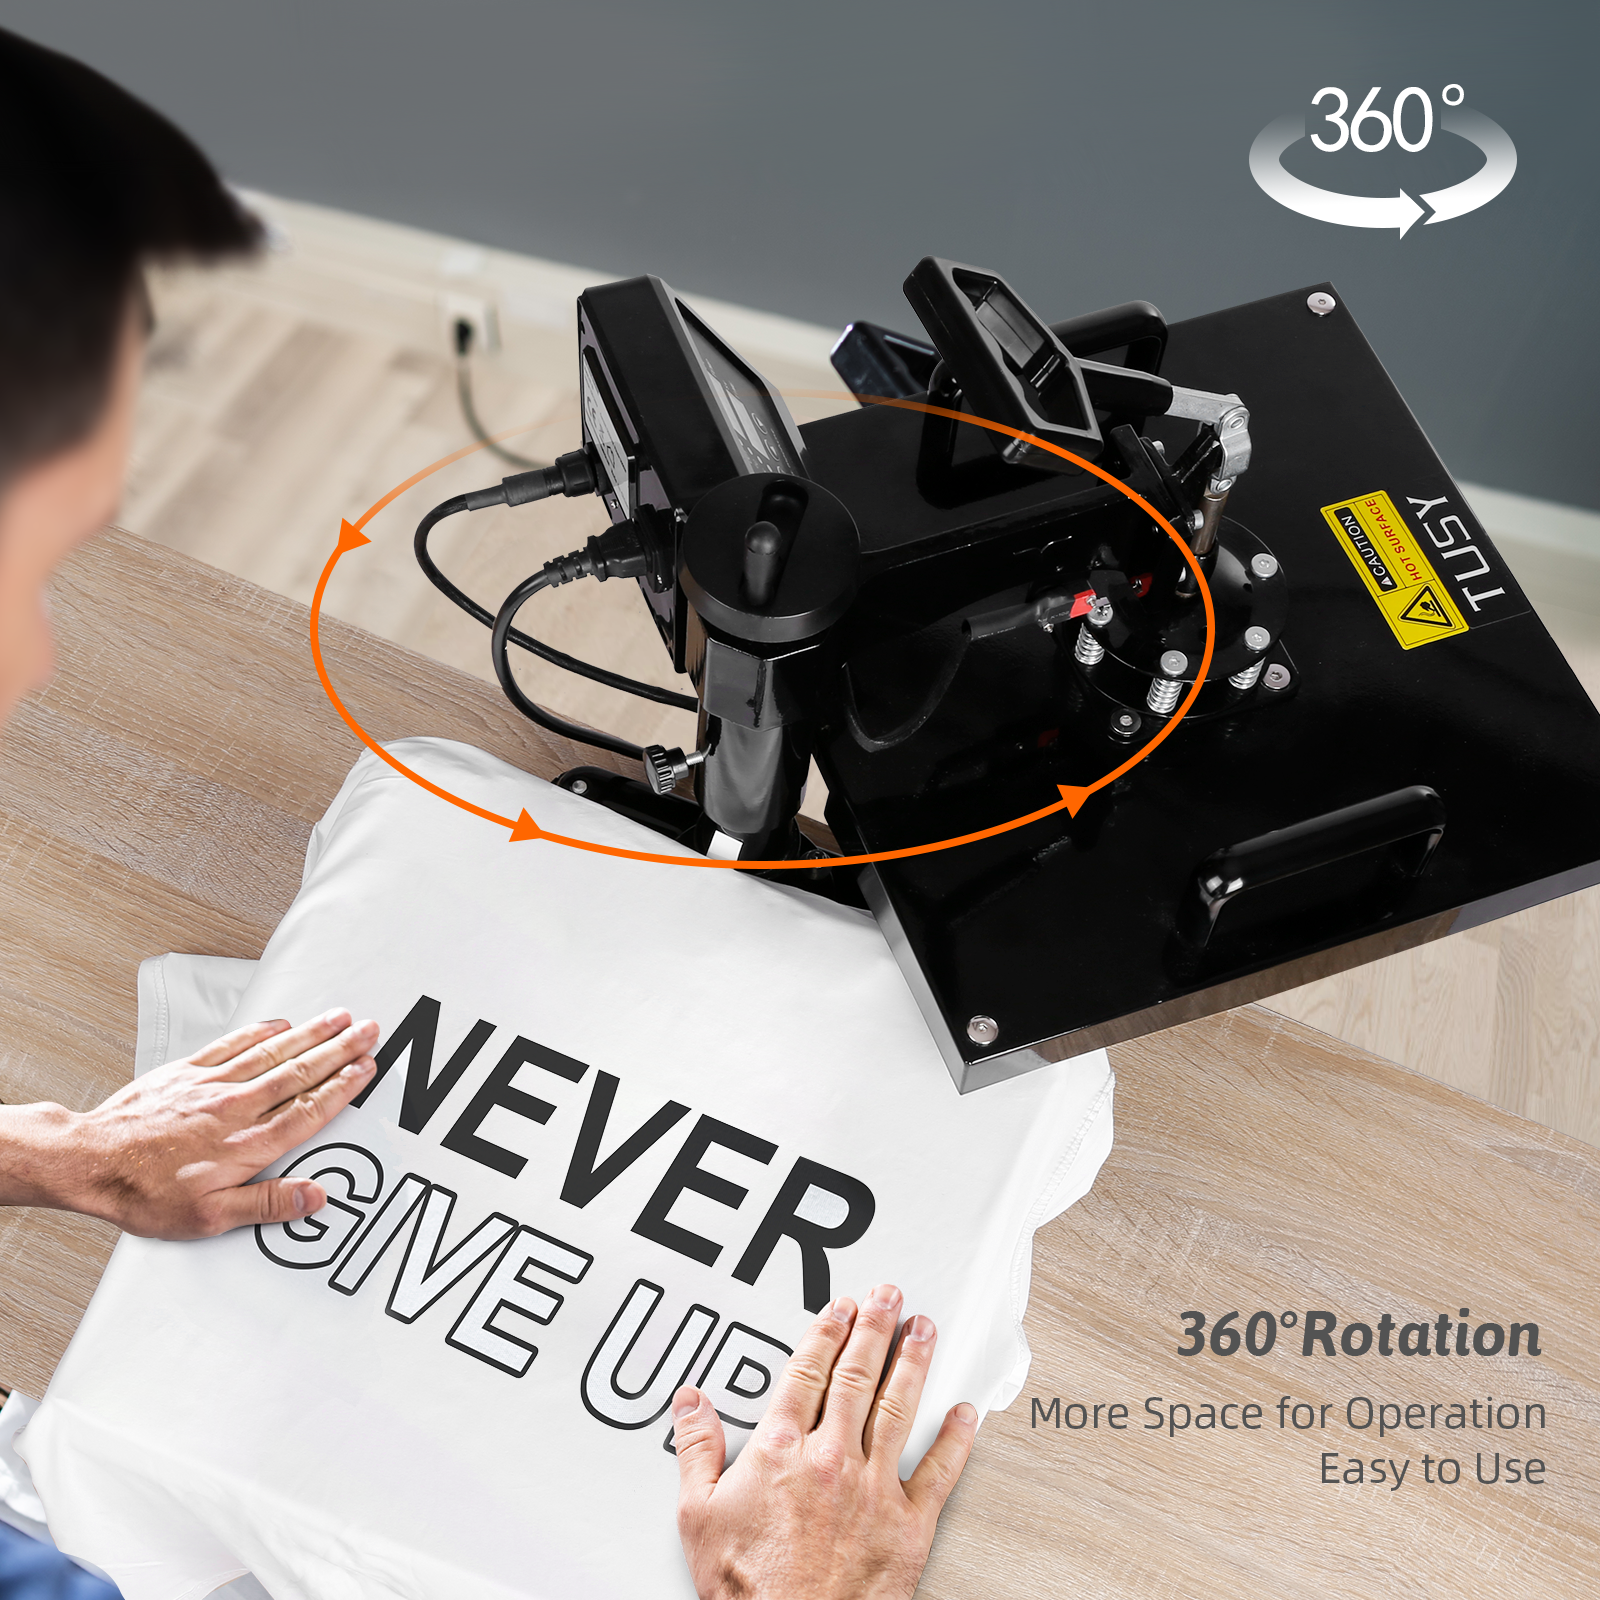  Customer reviews: TUSY Heat Press Machine, 15x15 inch Heat  Press for t Shirts, Fast Heating for Heat Sublimation and Heat Vinyl  Transfer